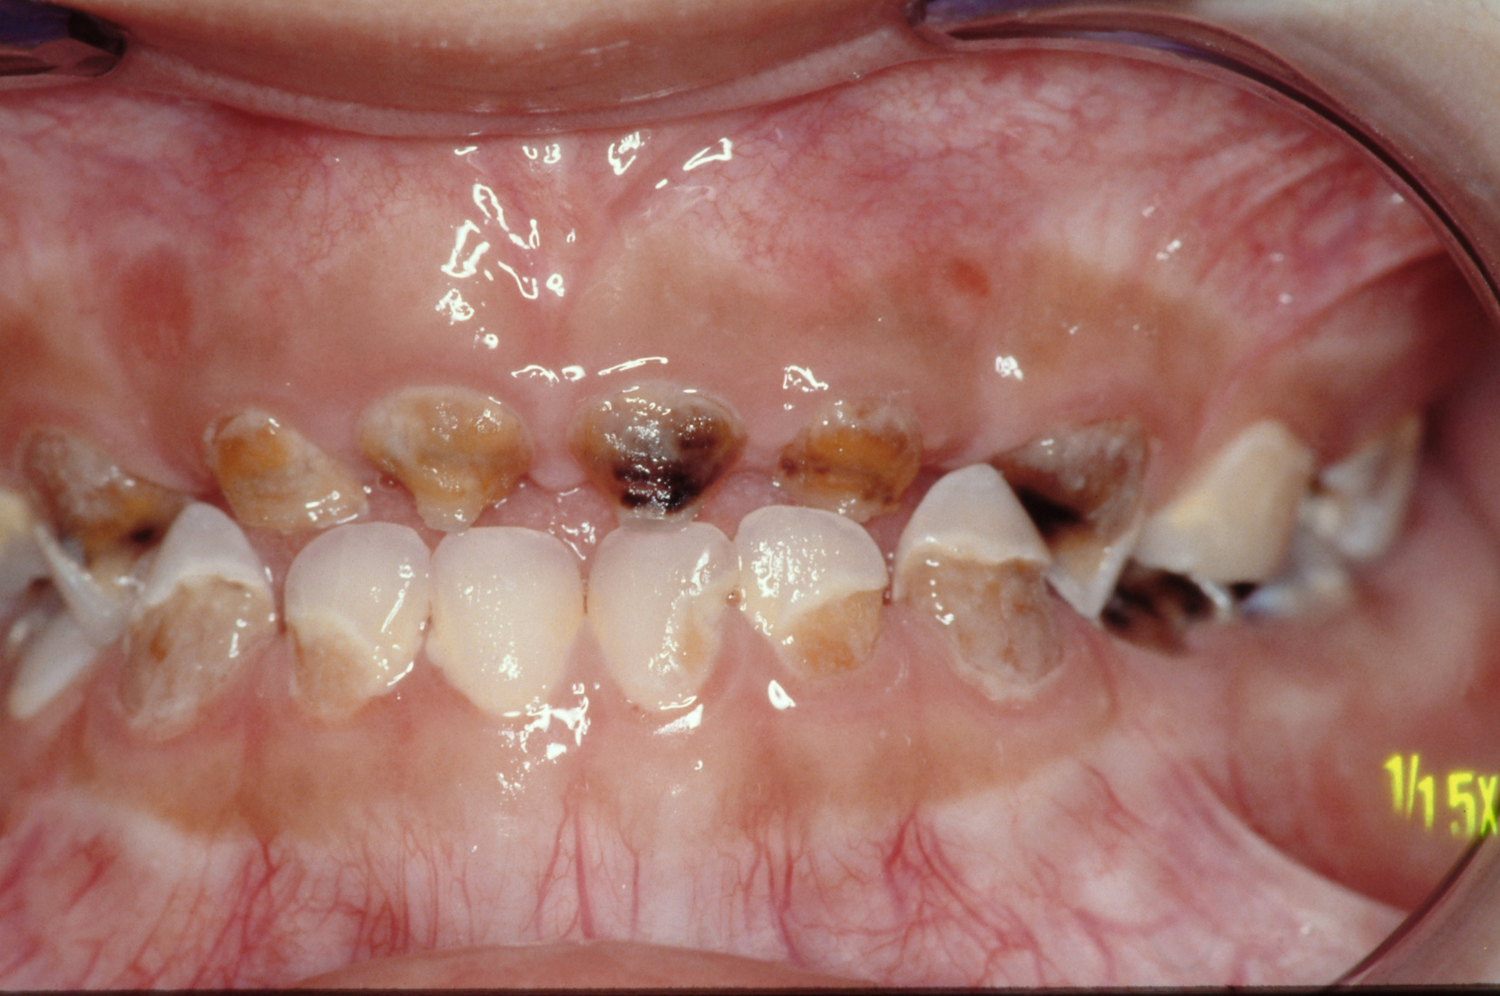 Child with multiple tooth decay.